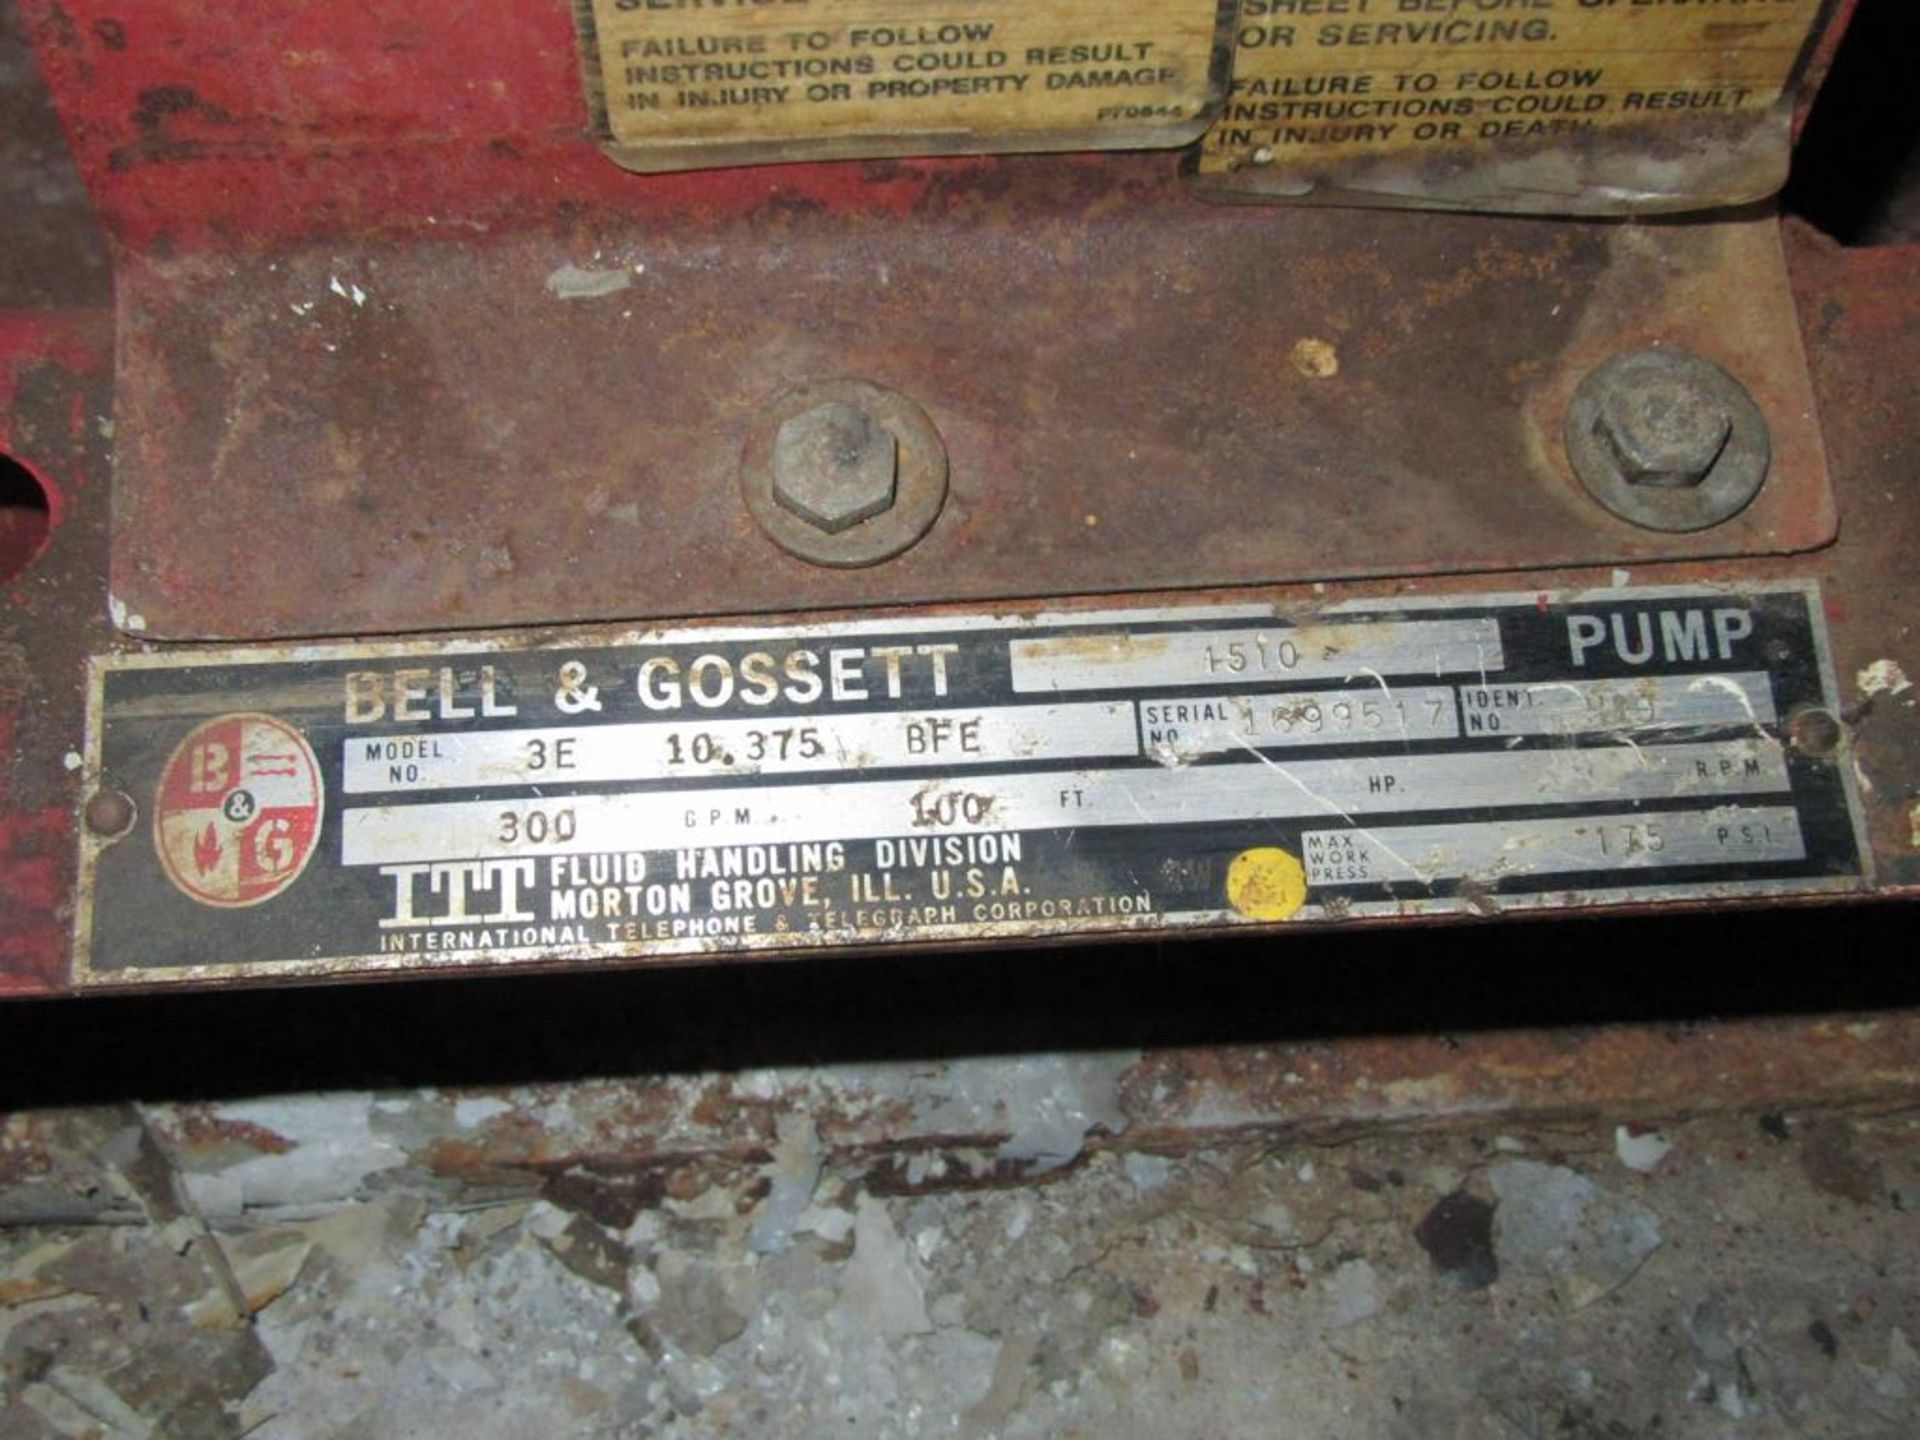 Bell & Gossett 3E Pump & Motor; 300 GPM Pump, Imp. Dia. 10.375, 175 PSI with Lincoln 15 HP Motor - Image 2 of 3